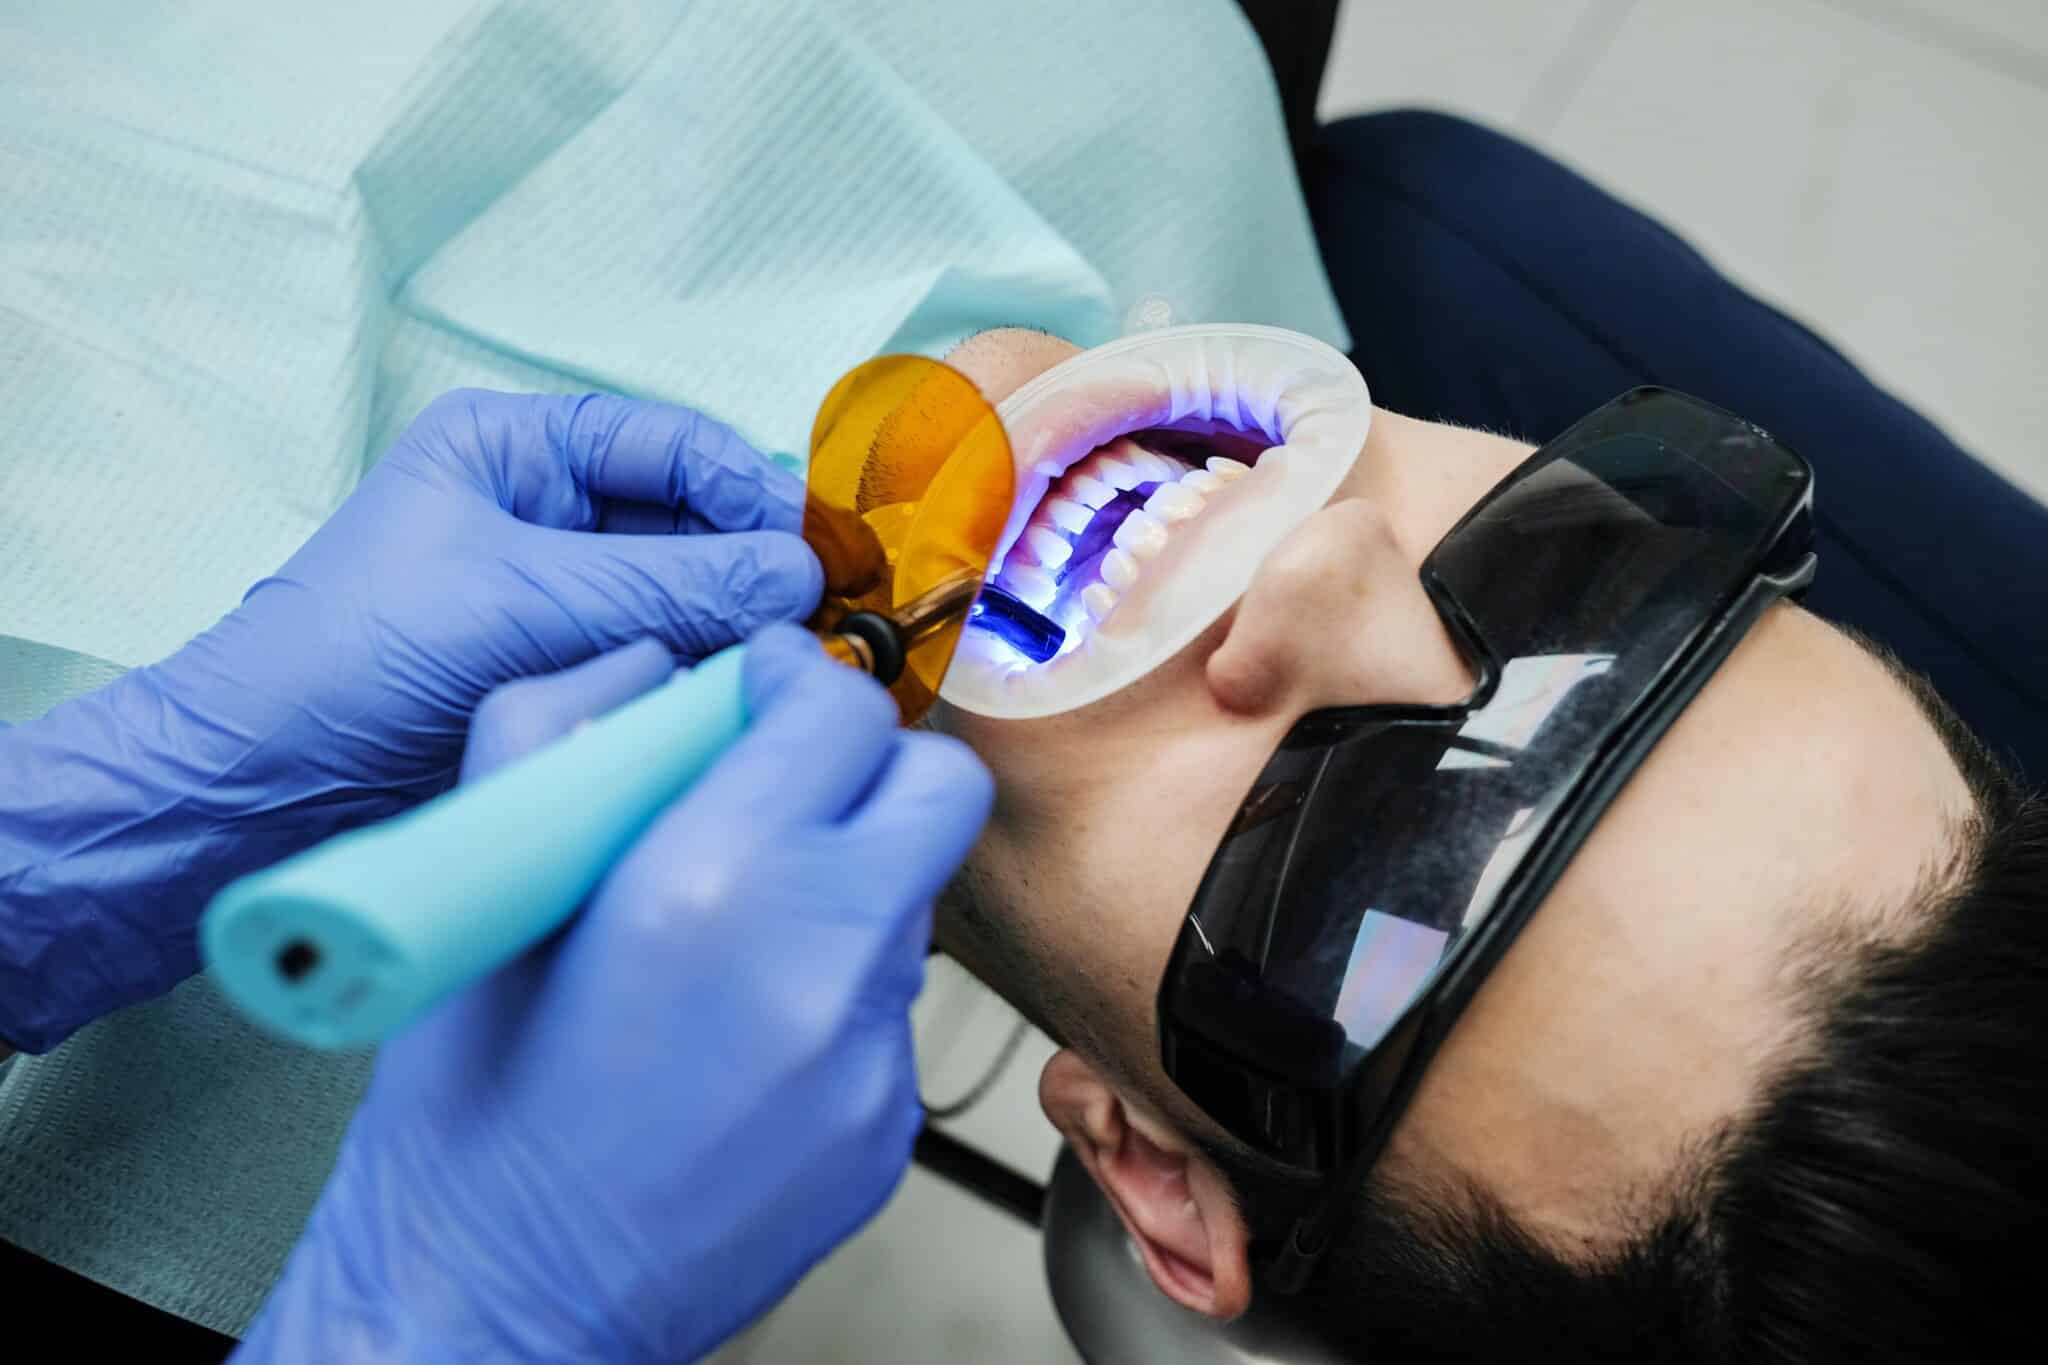 teeth whitening process for Essential Pre-Wedding Grooming Treatments